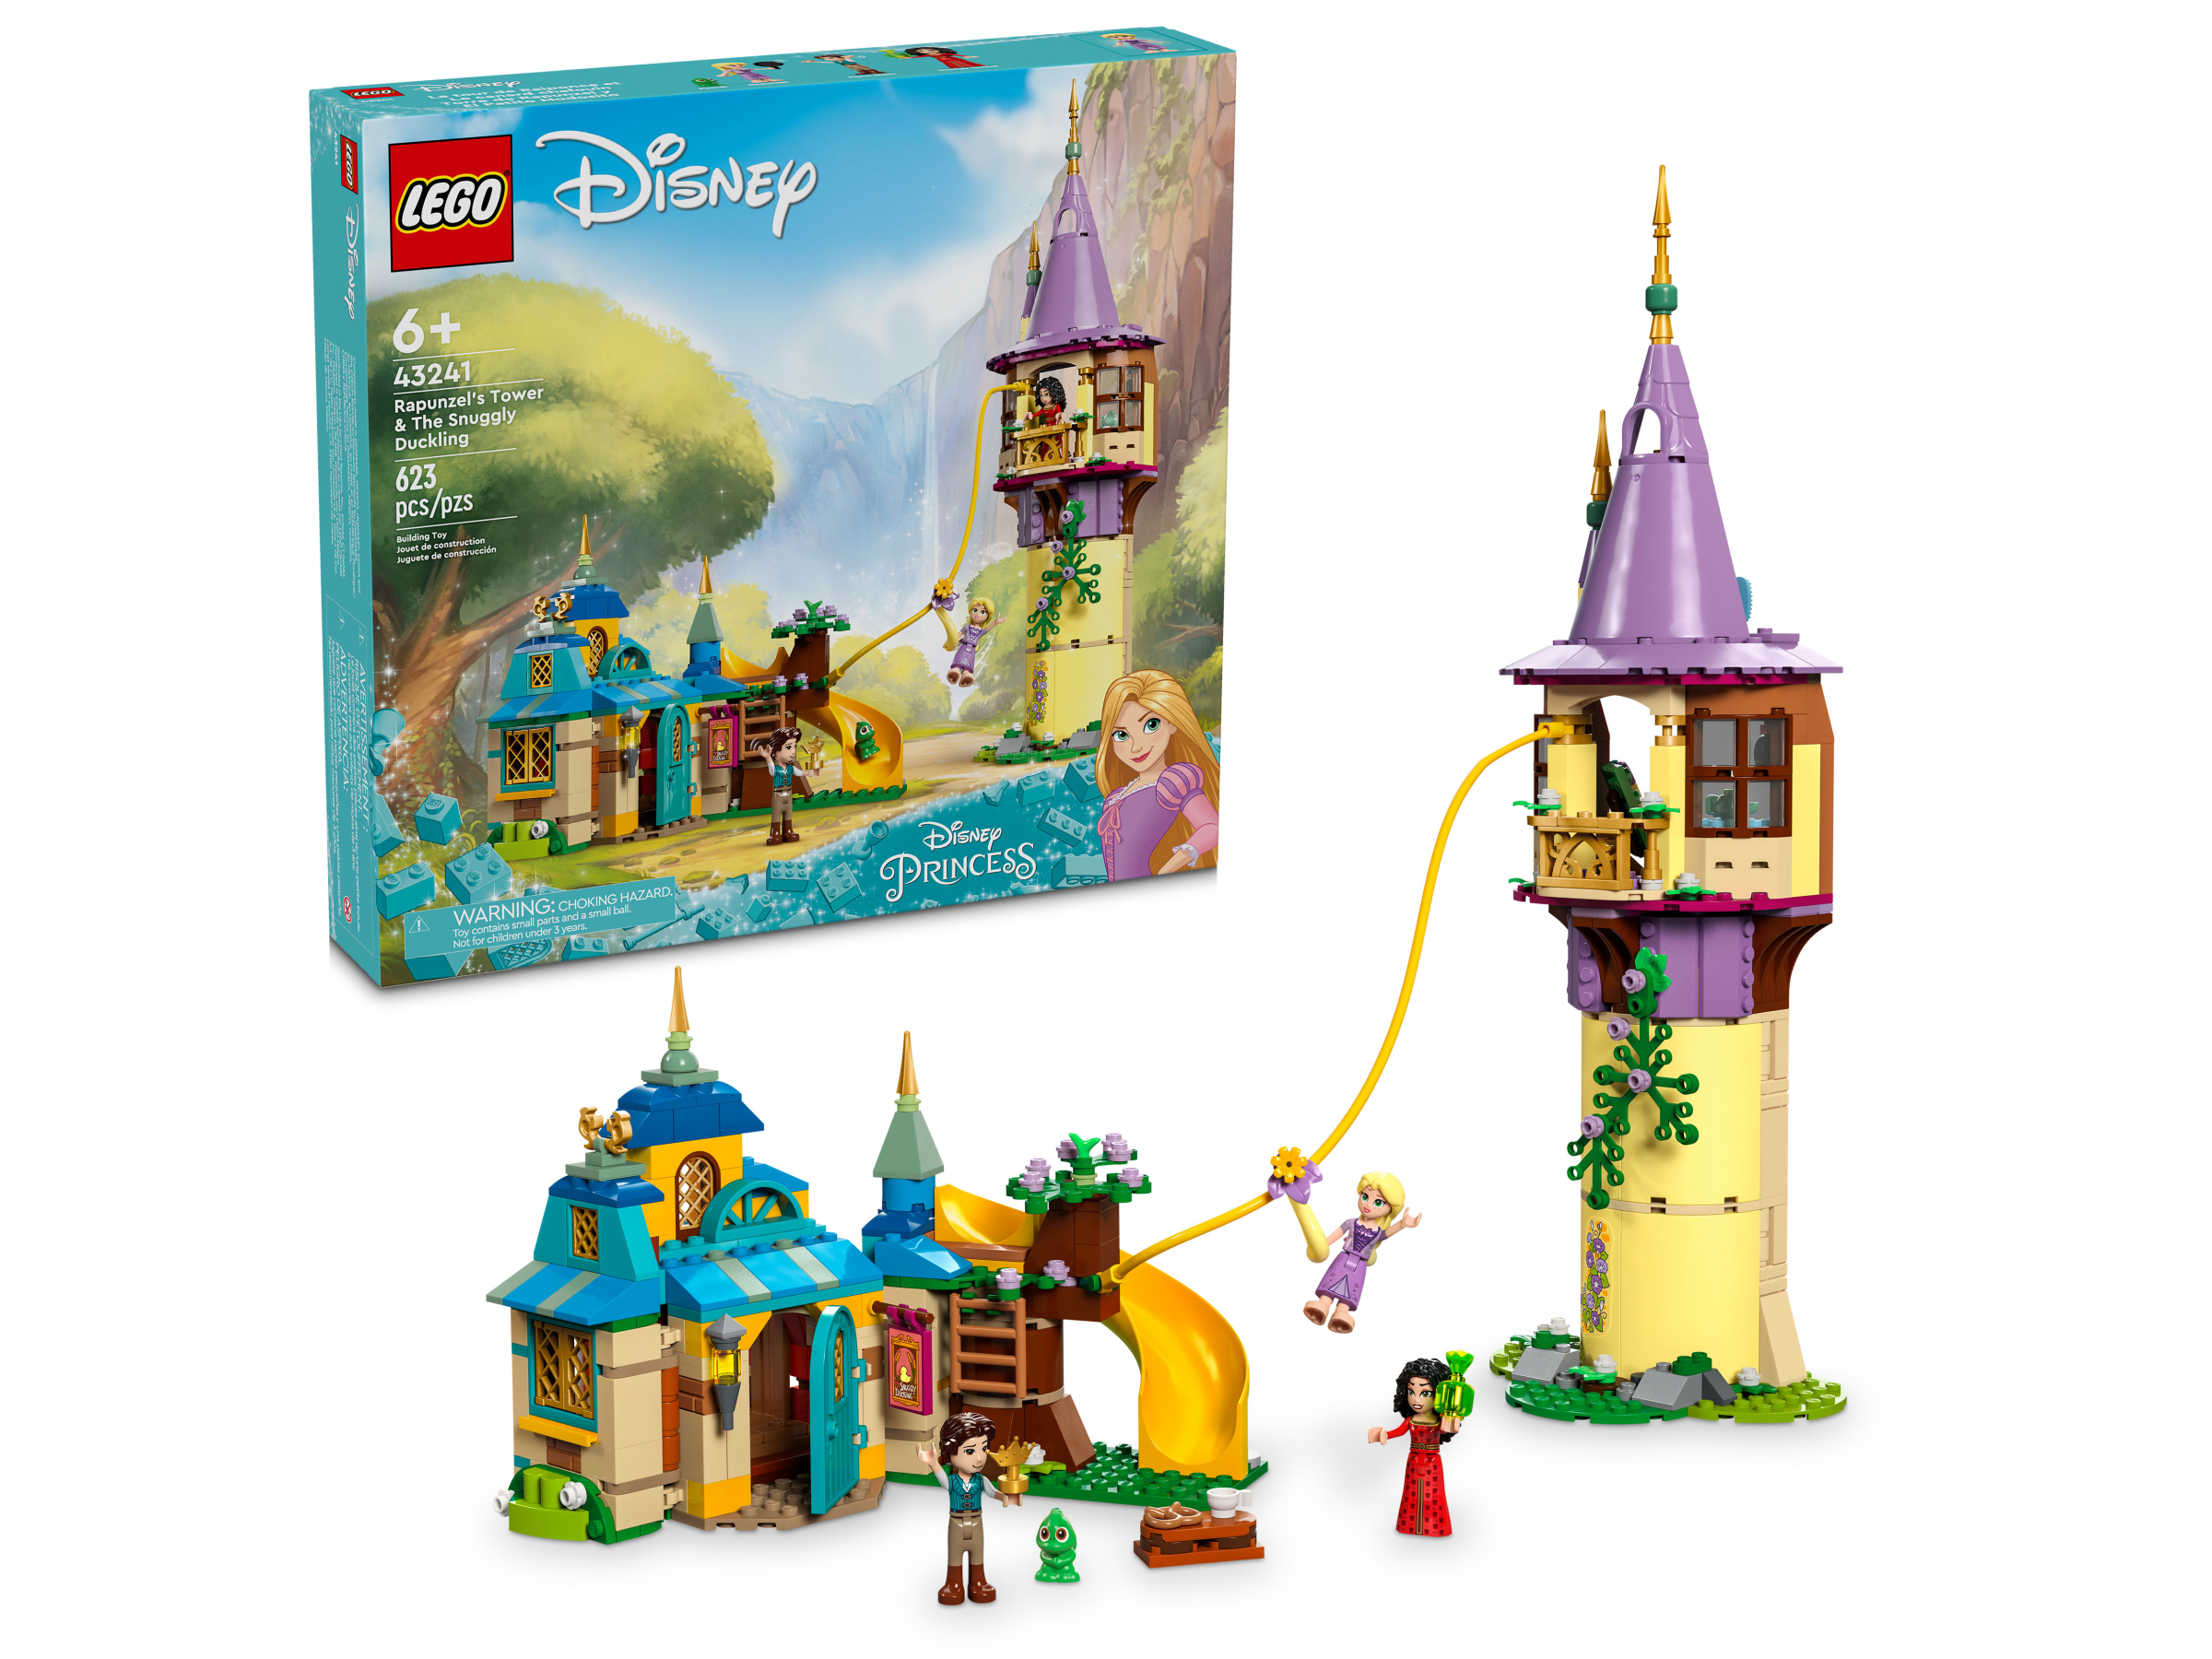 Rapunzel's Tower & The Snuggly Duckling 43241, Disney™